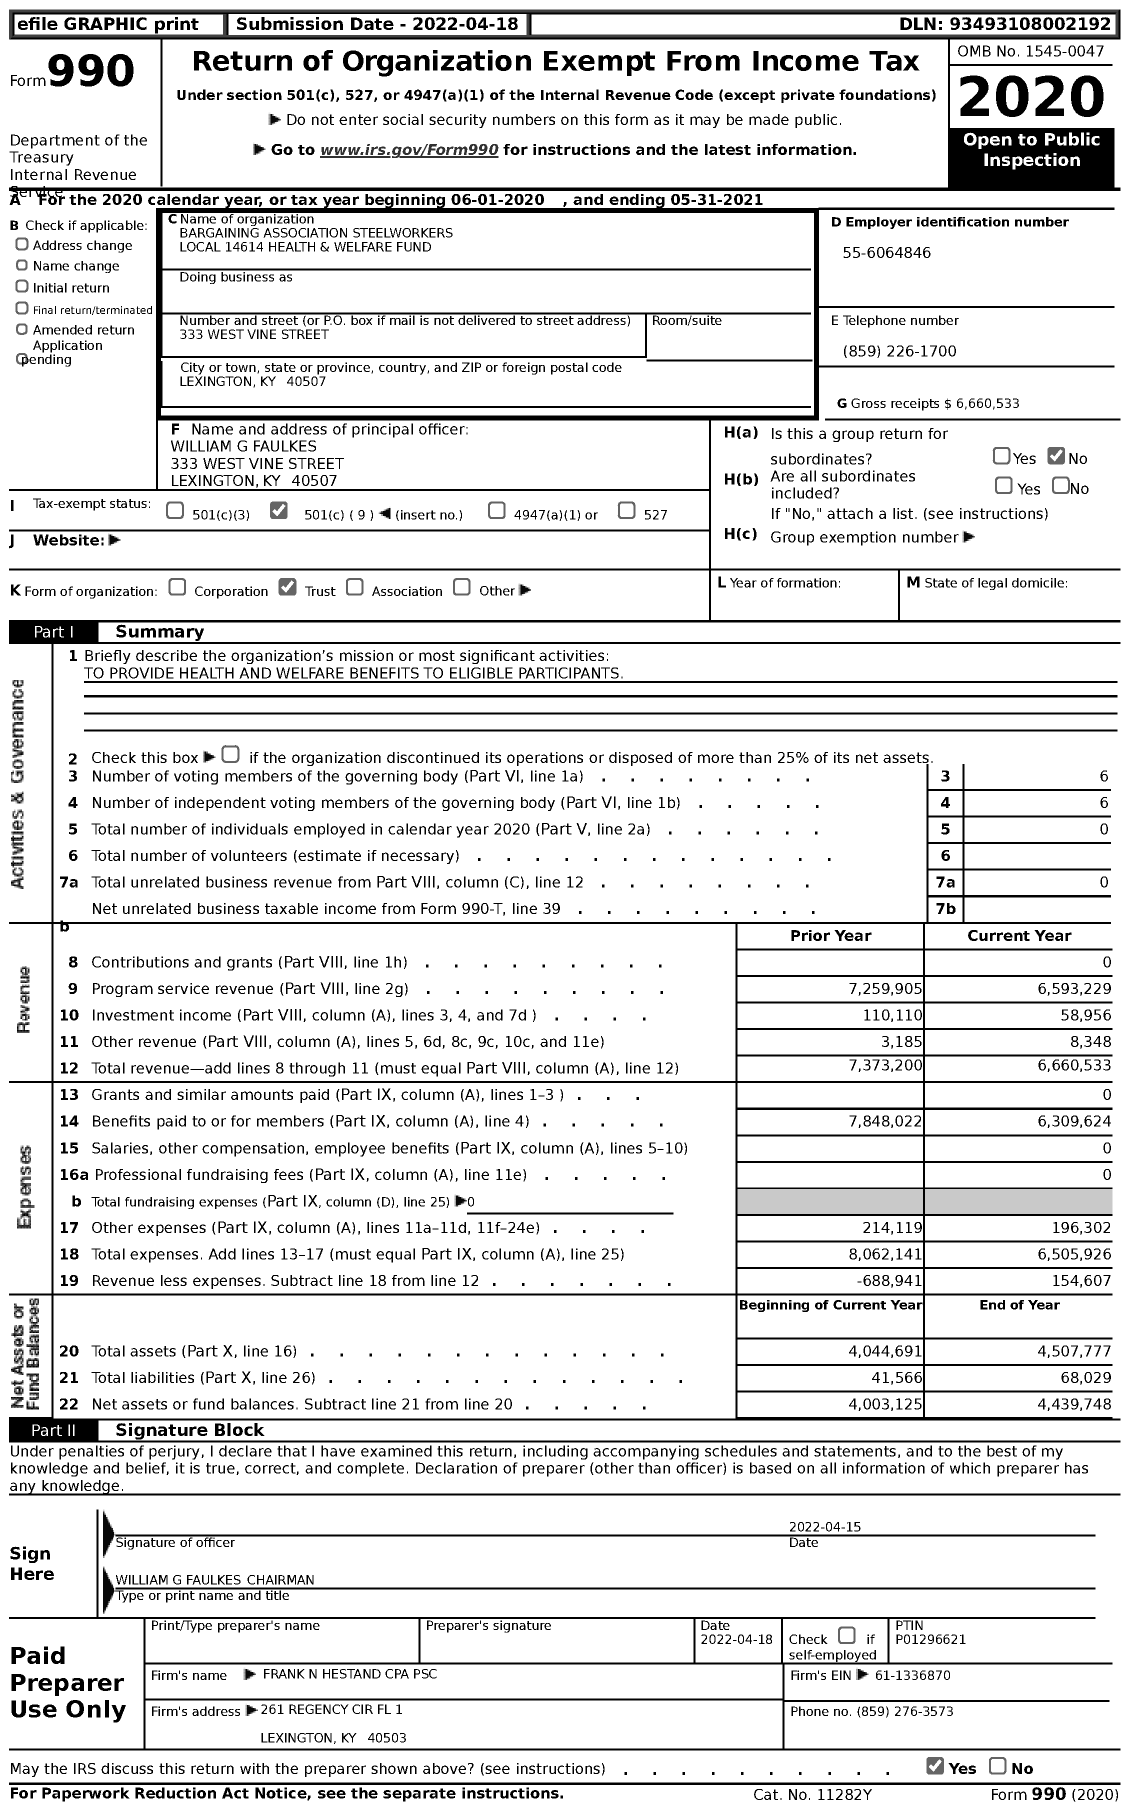 Image of first page of 2020 Form 990 for Bargaining Association Steelworkers Local 14614 Health and Welfare Fund